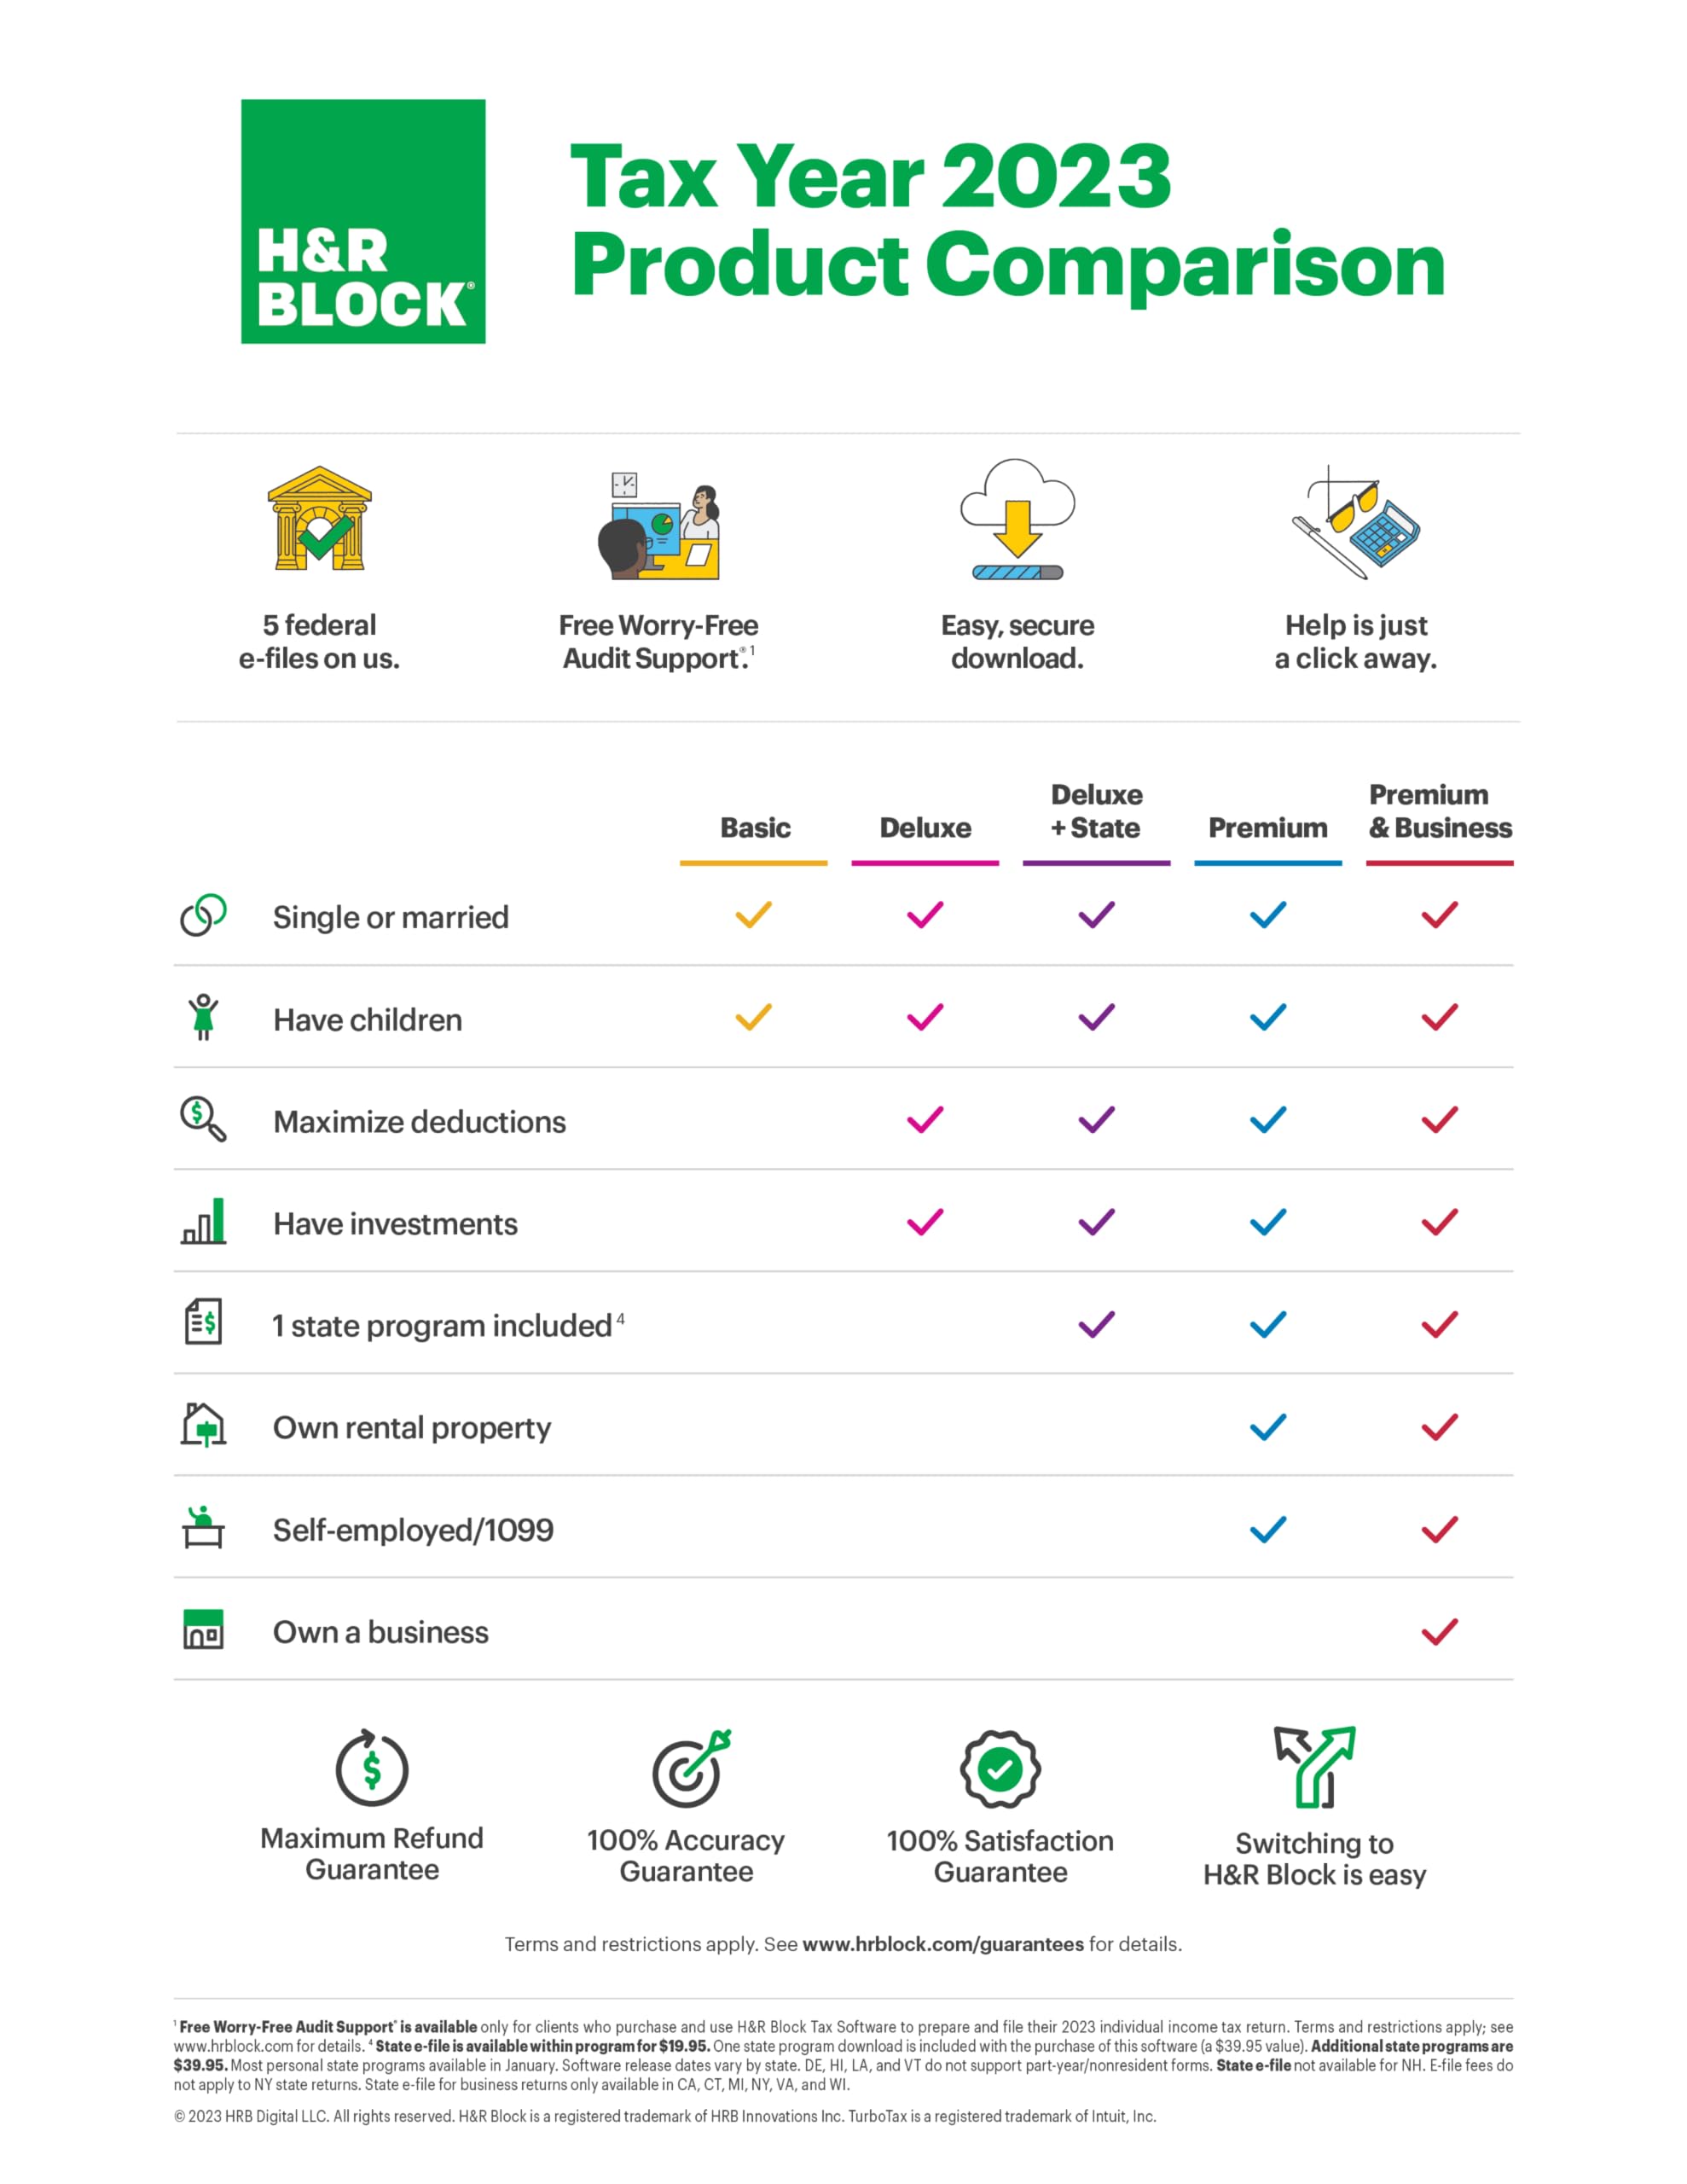 H&R Block Tax Software Deluxe + State 2023 with Refund Bonus Offer (Amazon Exclusive) (PC/MAC Download)